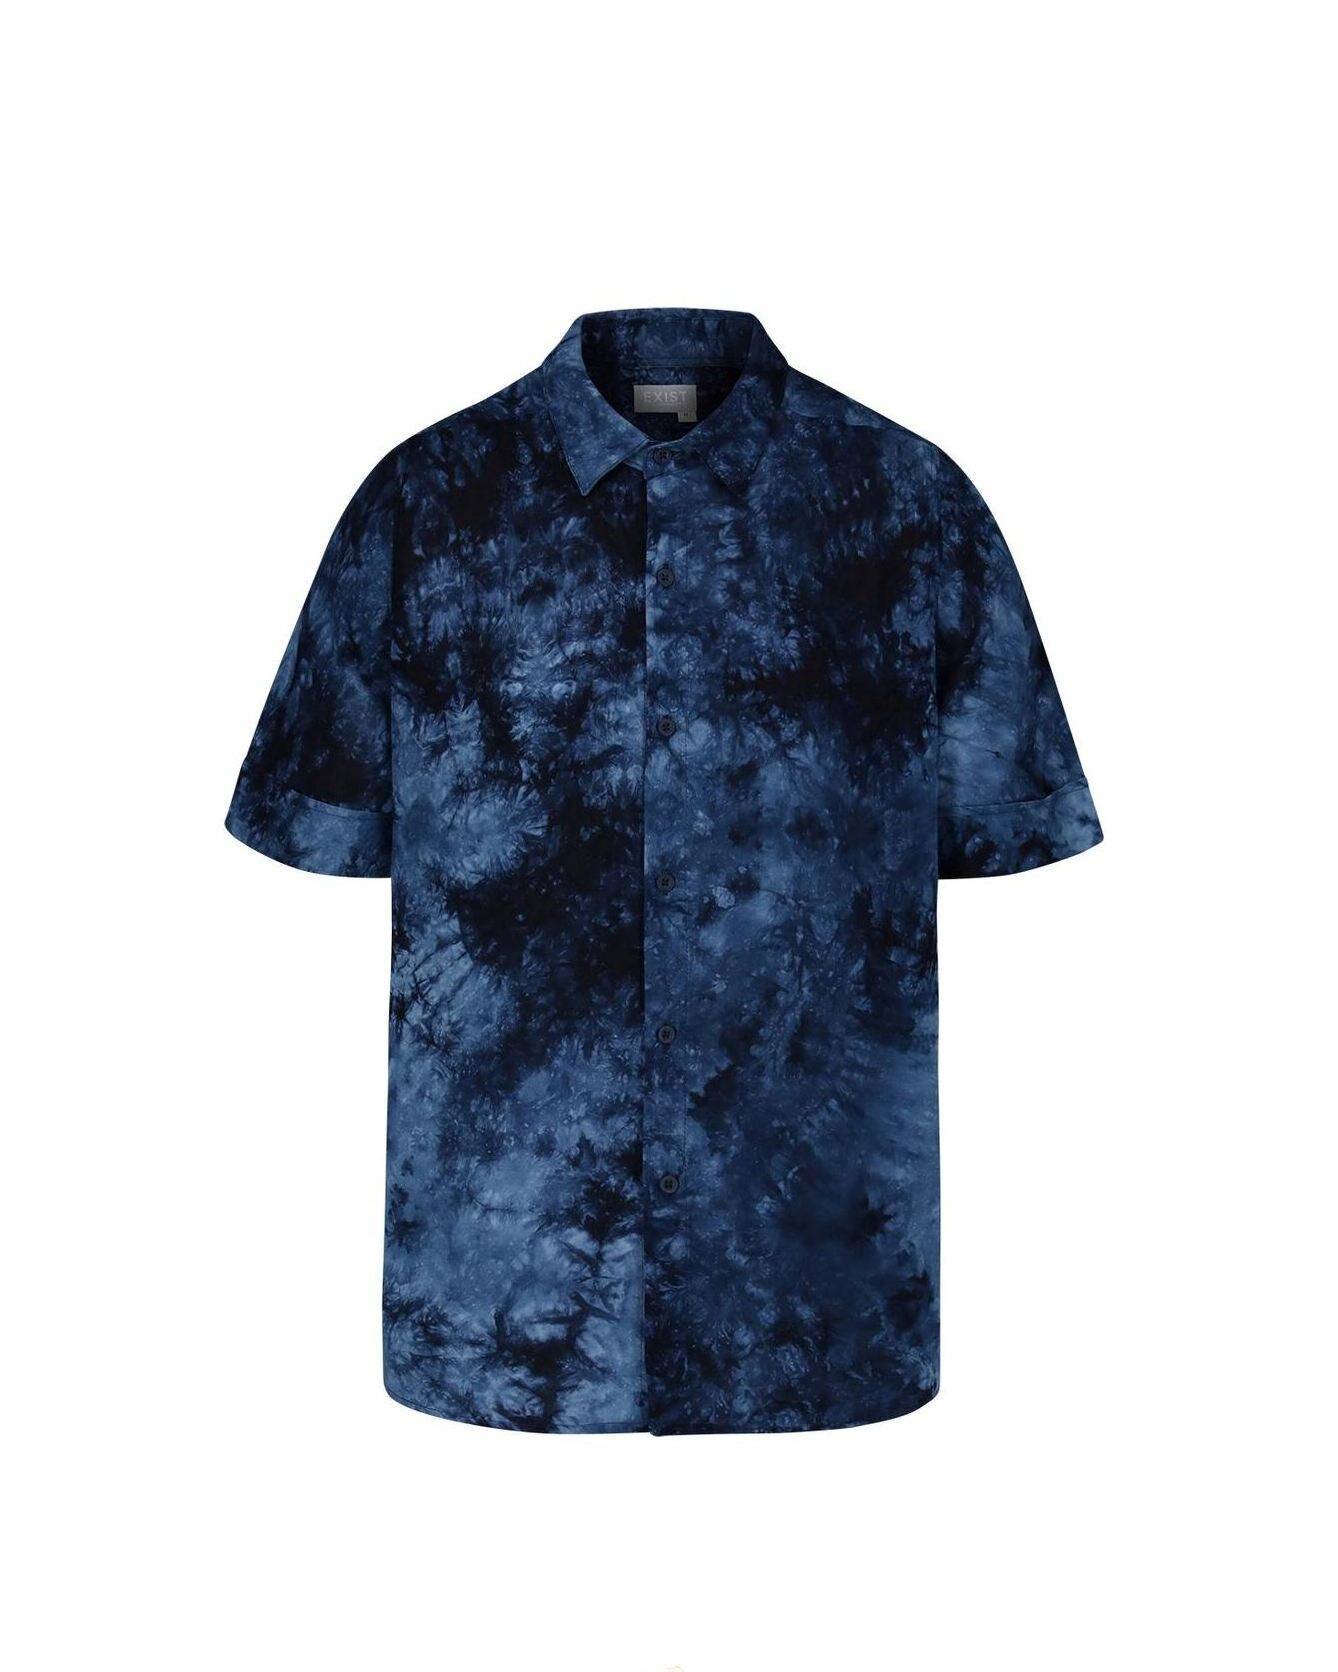 Our Tie Dye Shirt, available in blue, green, and sand colors
.
.
#exist #amorandrosas #tiedye #socialimpact #ethicalfashion #shadesofblue #romanorte #cdmx #ootd